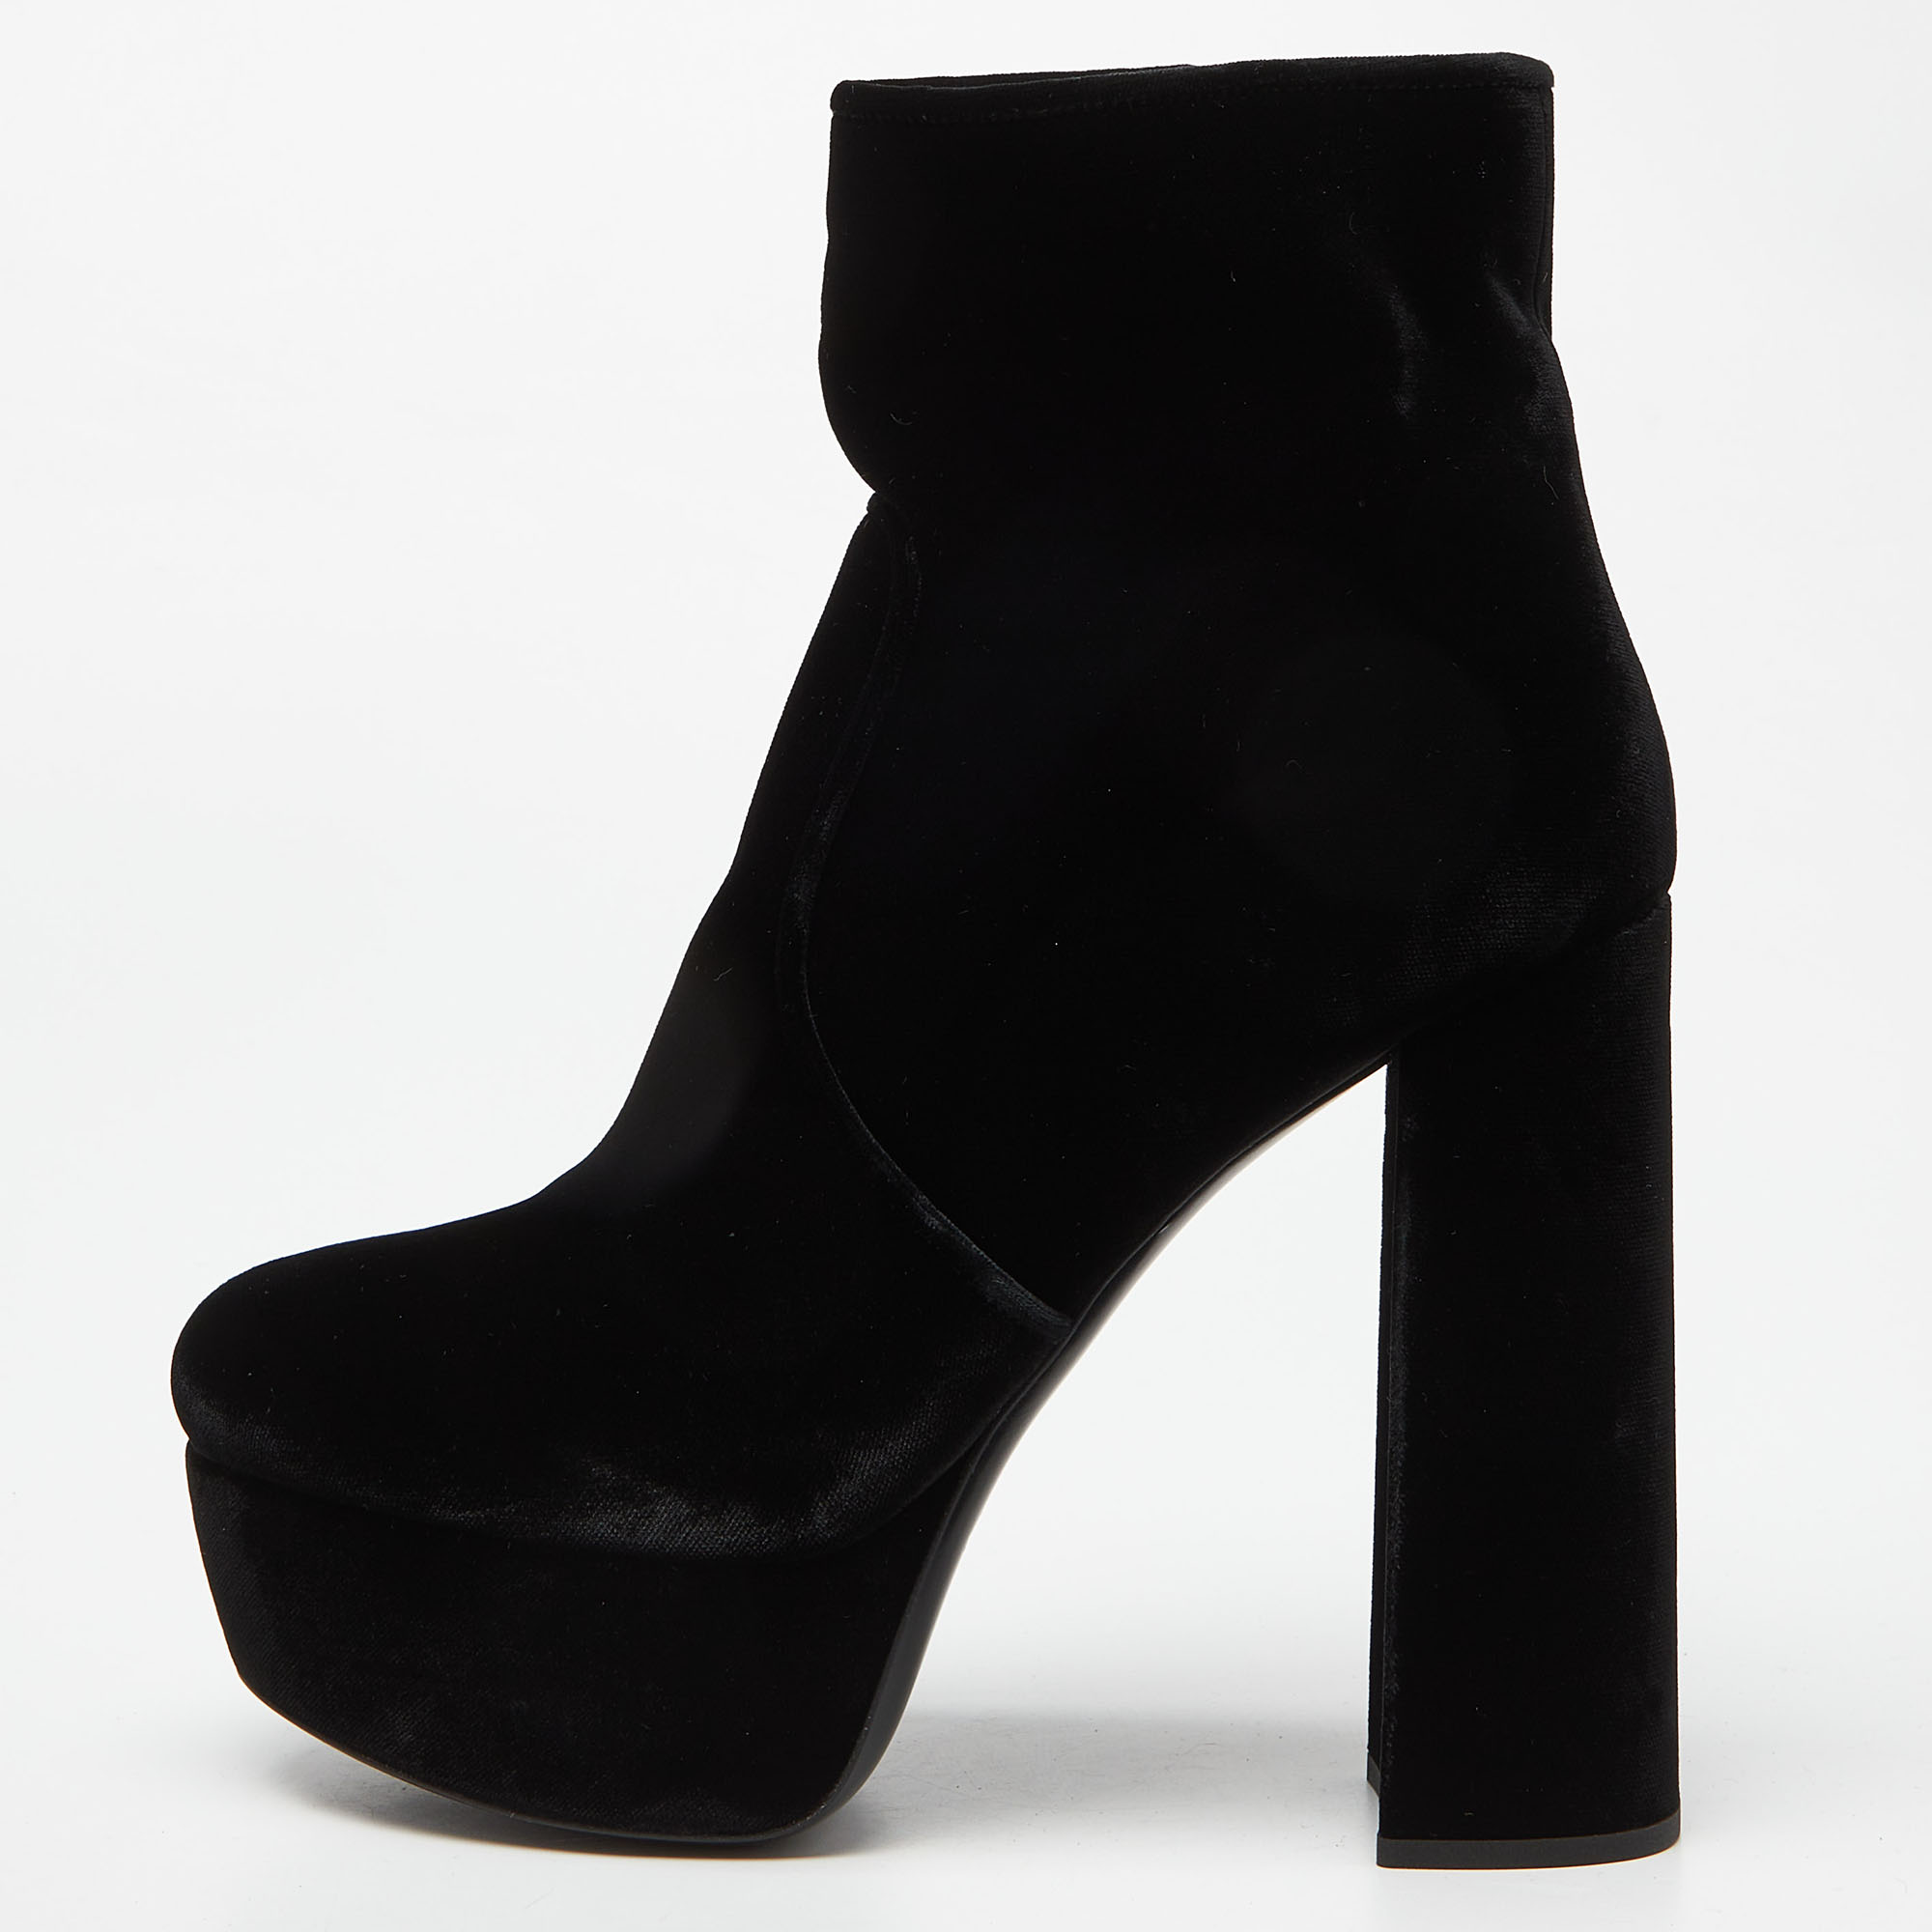 A perfect pair of stylish and effortlessly statement shoes that will last you through seasons and occasions these Miu Miu boots are a must have in your collection. Crafted in black velvet these ankle boots feature block heels which makes it perfect to wear longer hours. It is complete with zippers and comfortable insoles.